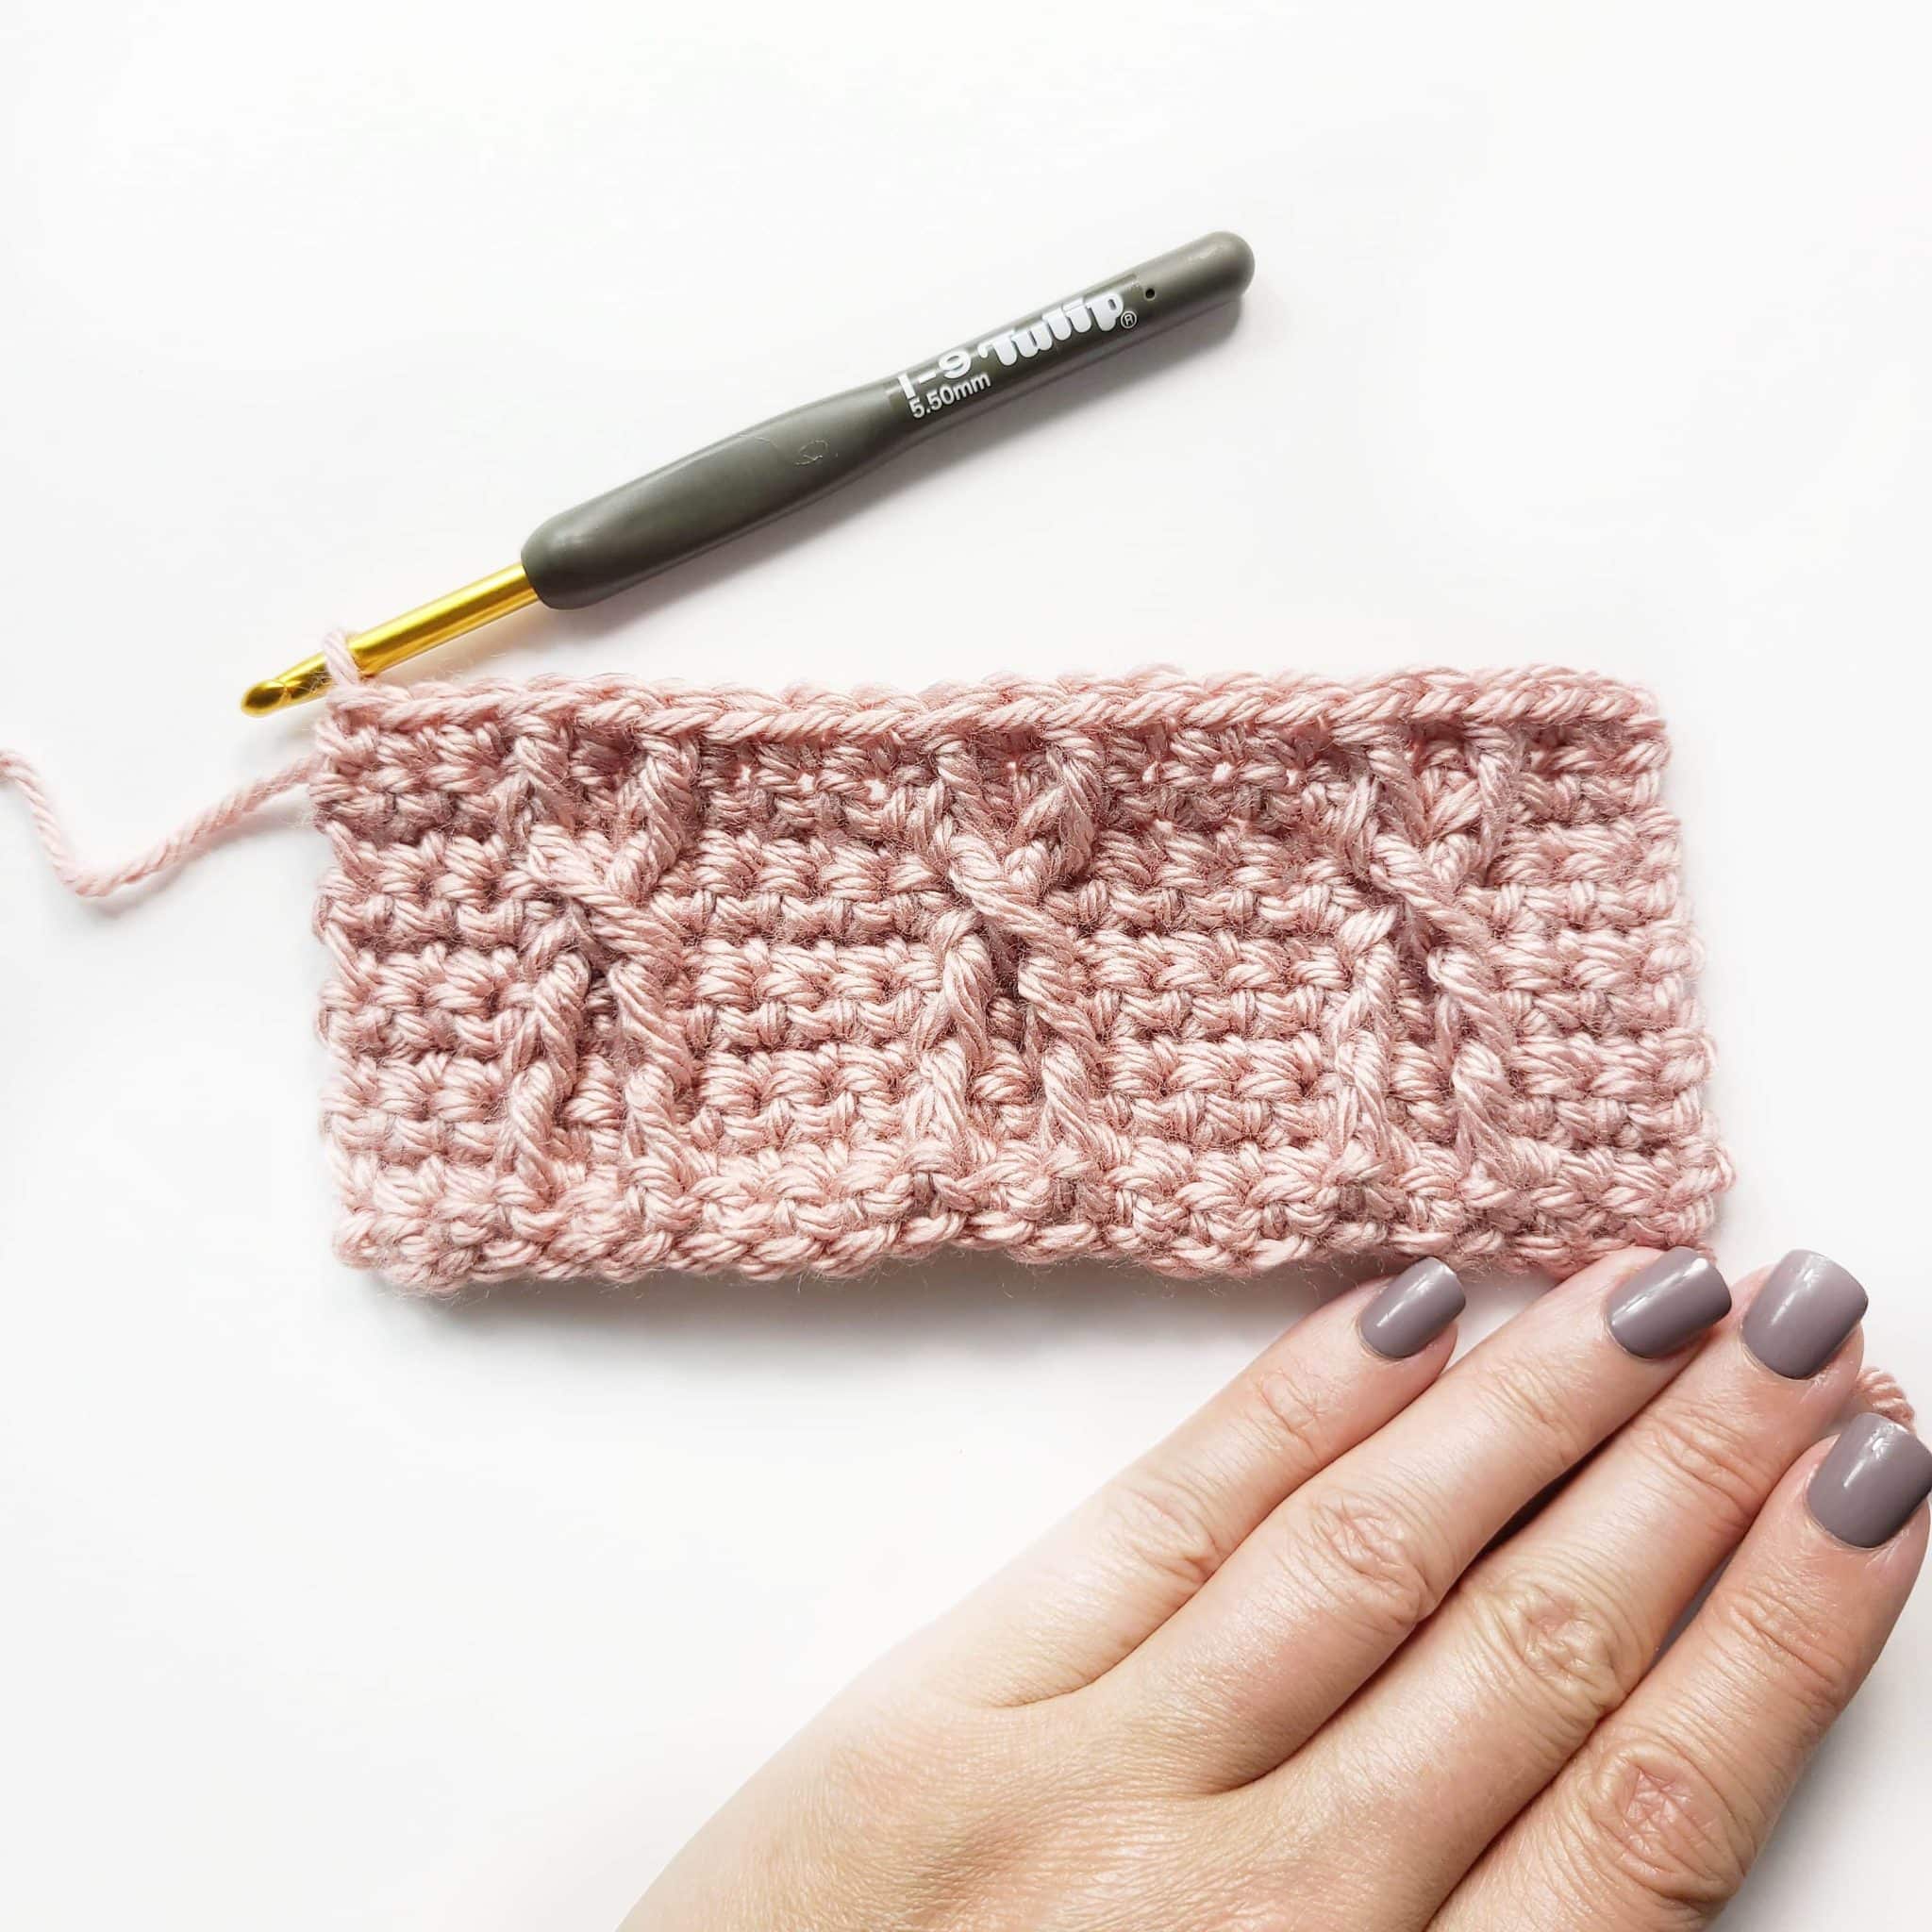 How to Crochet a Cable Stitch - Easy Crochet Patterns